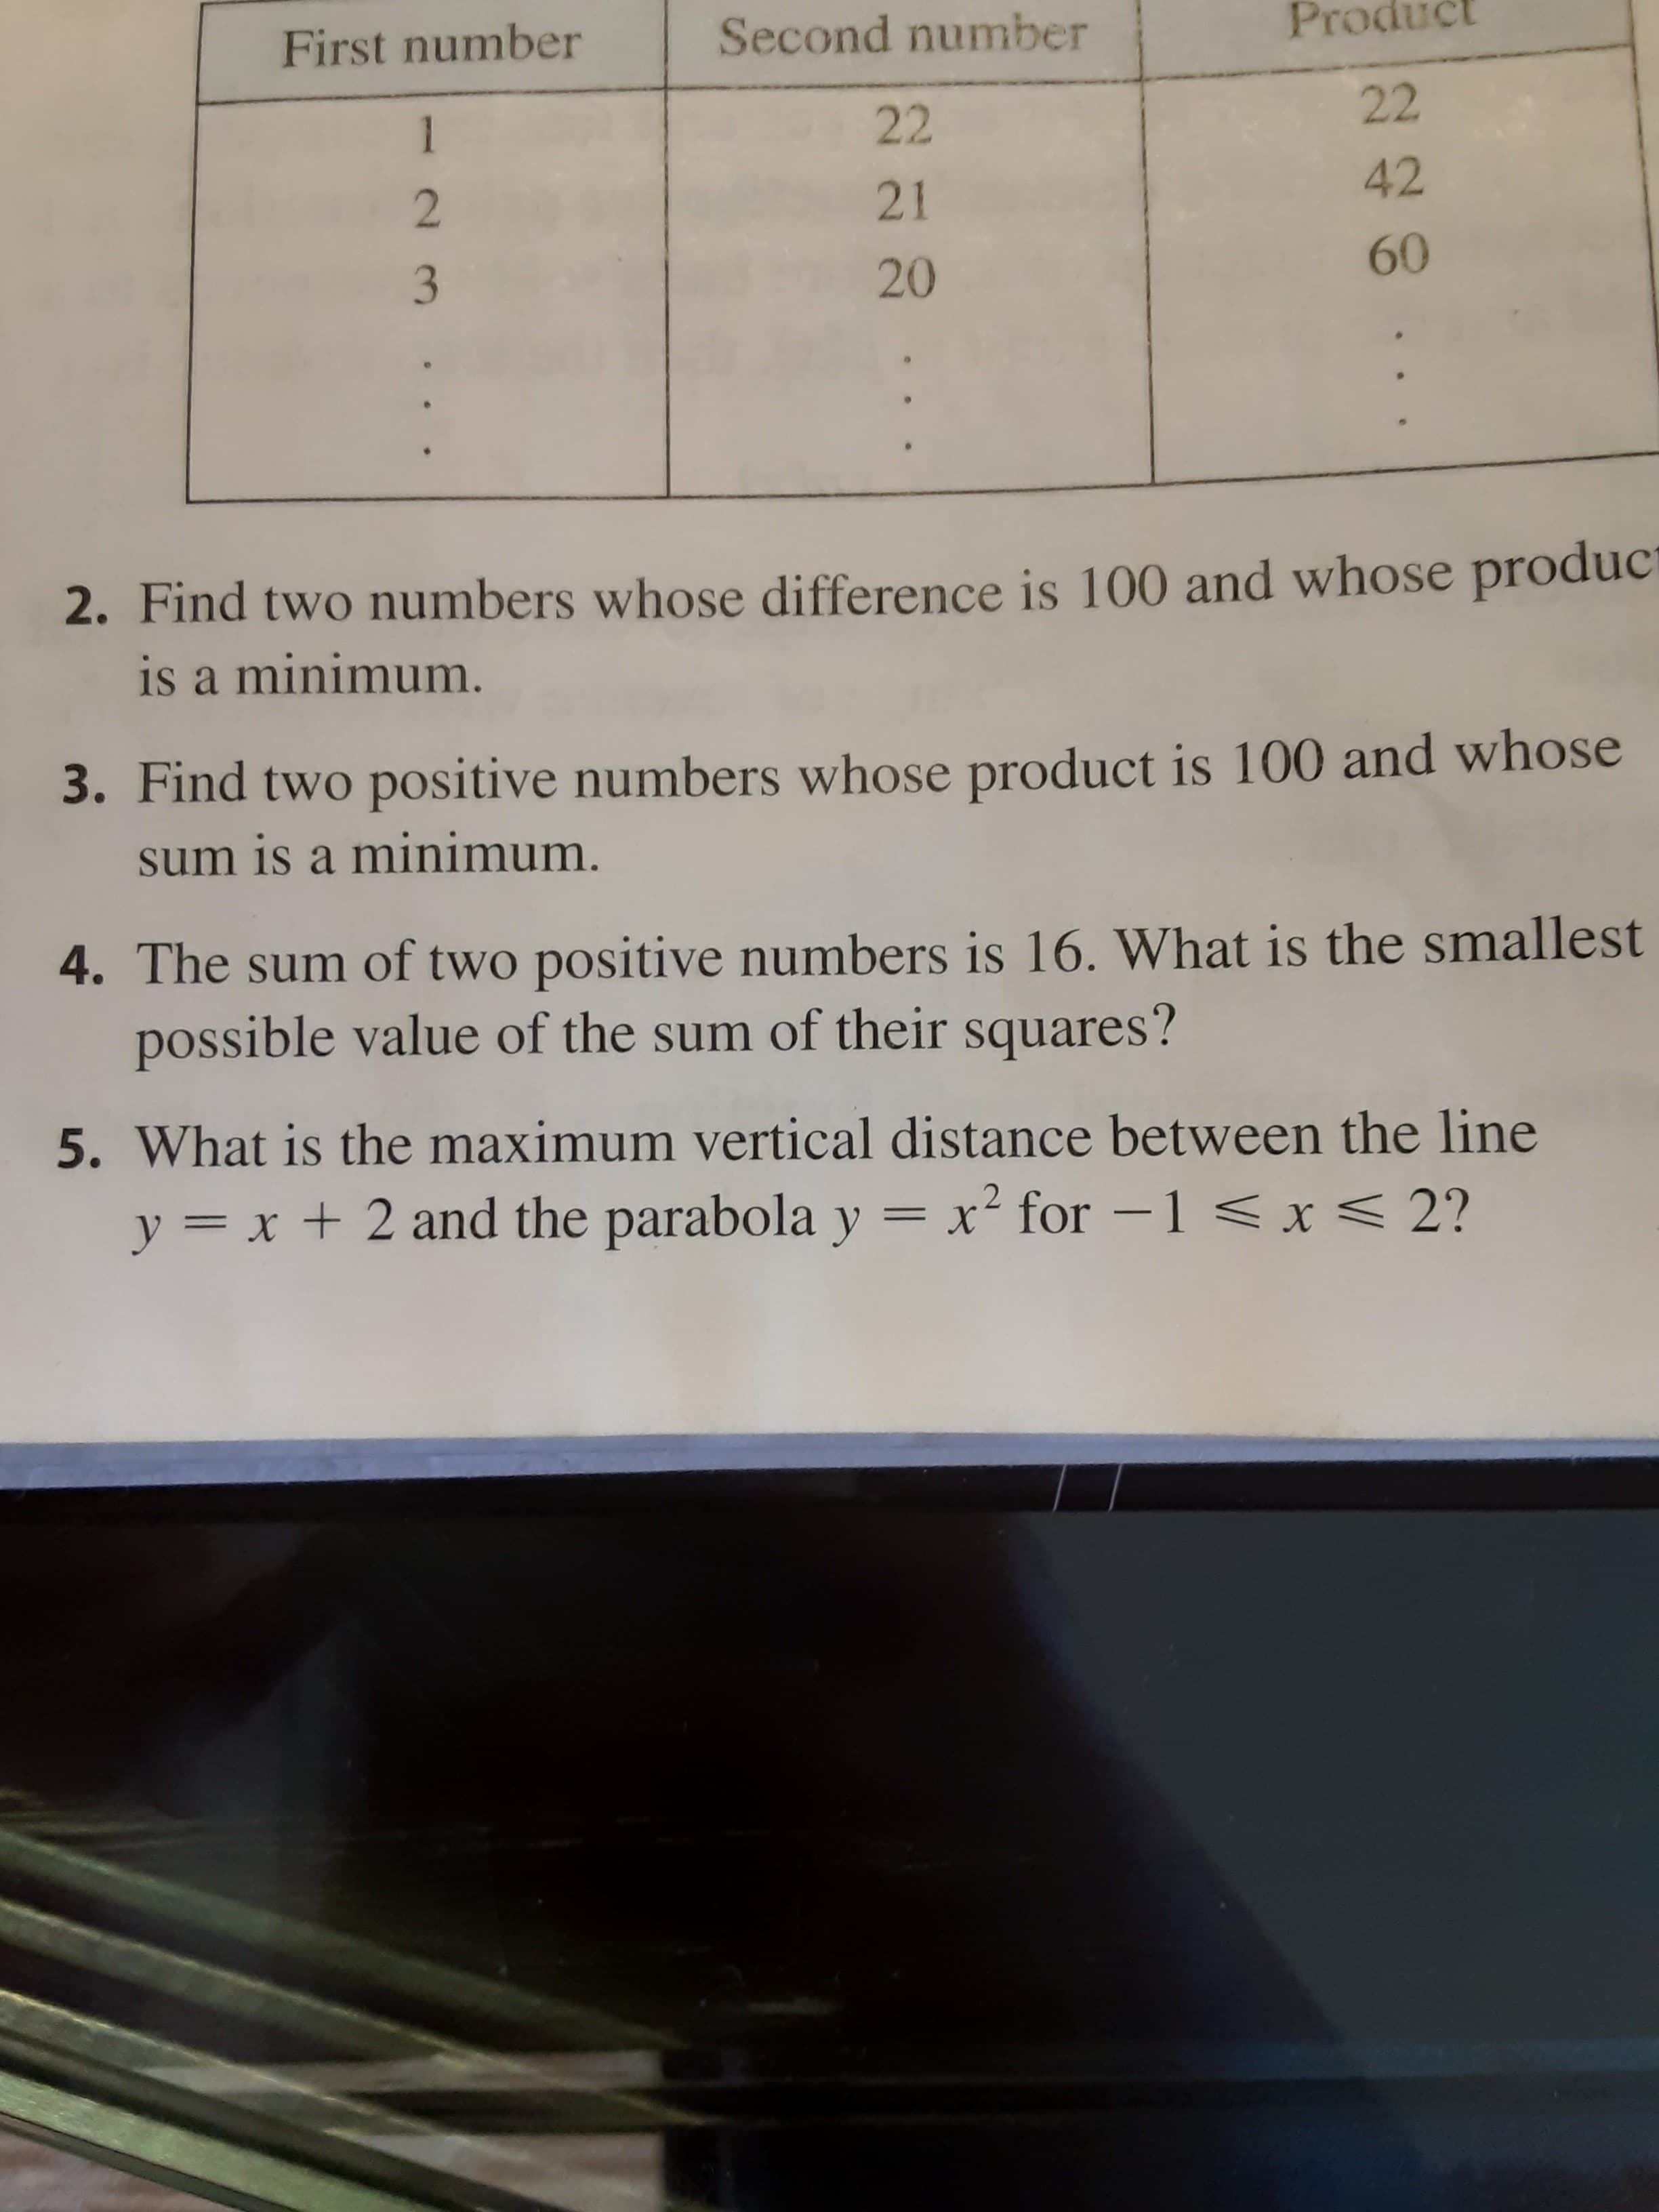 4. The sum of two positive numbers is 16. What is the smallest
possible value of the sum of their squares?
